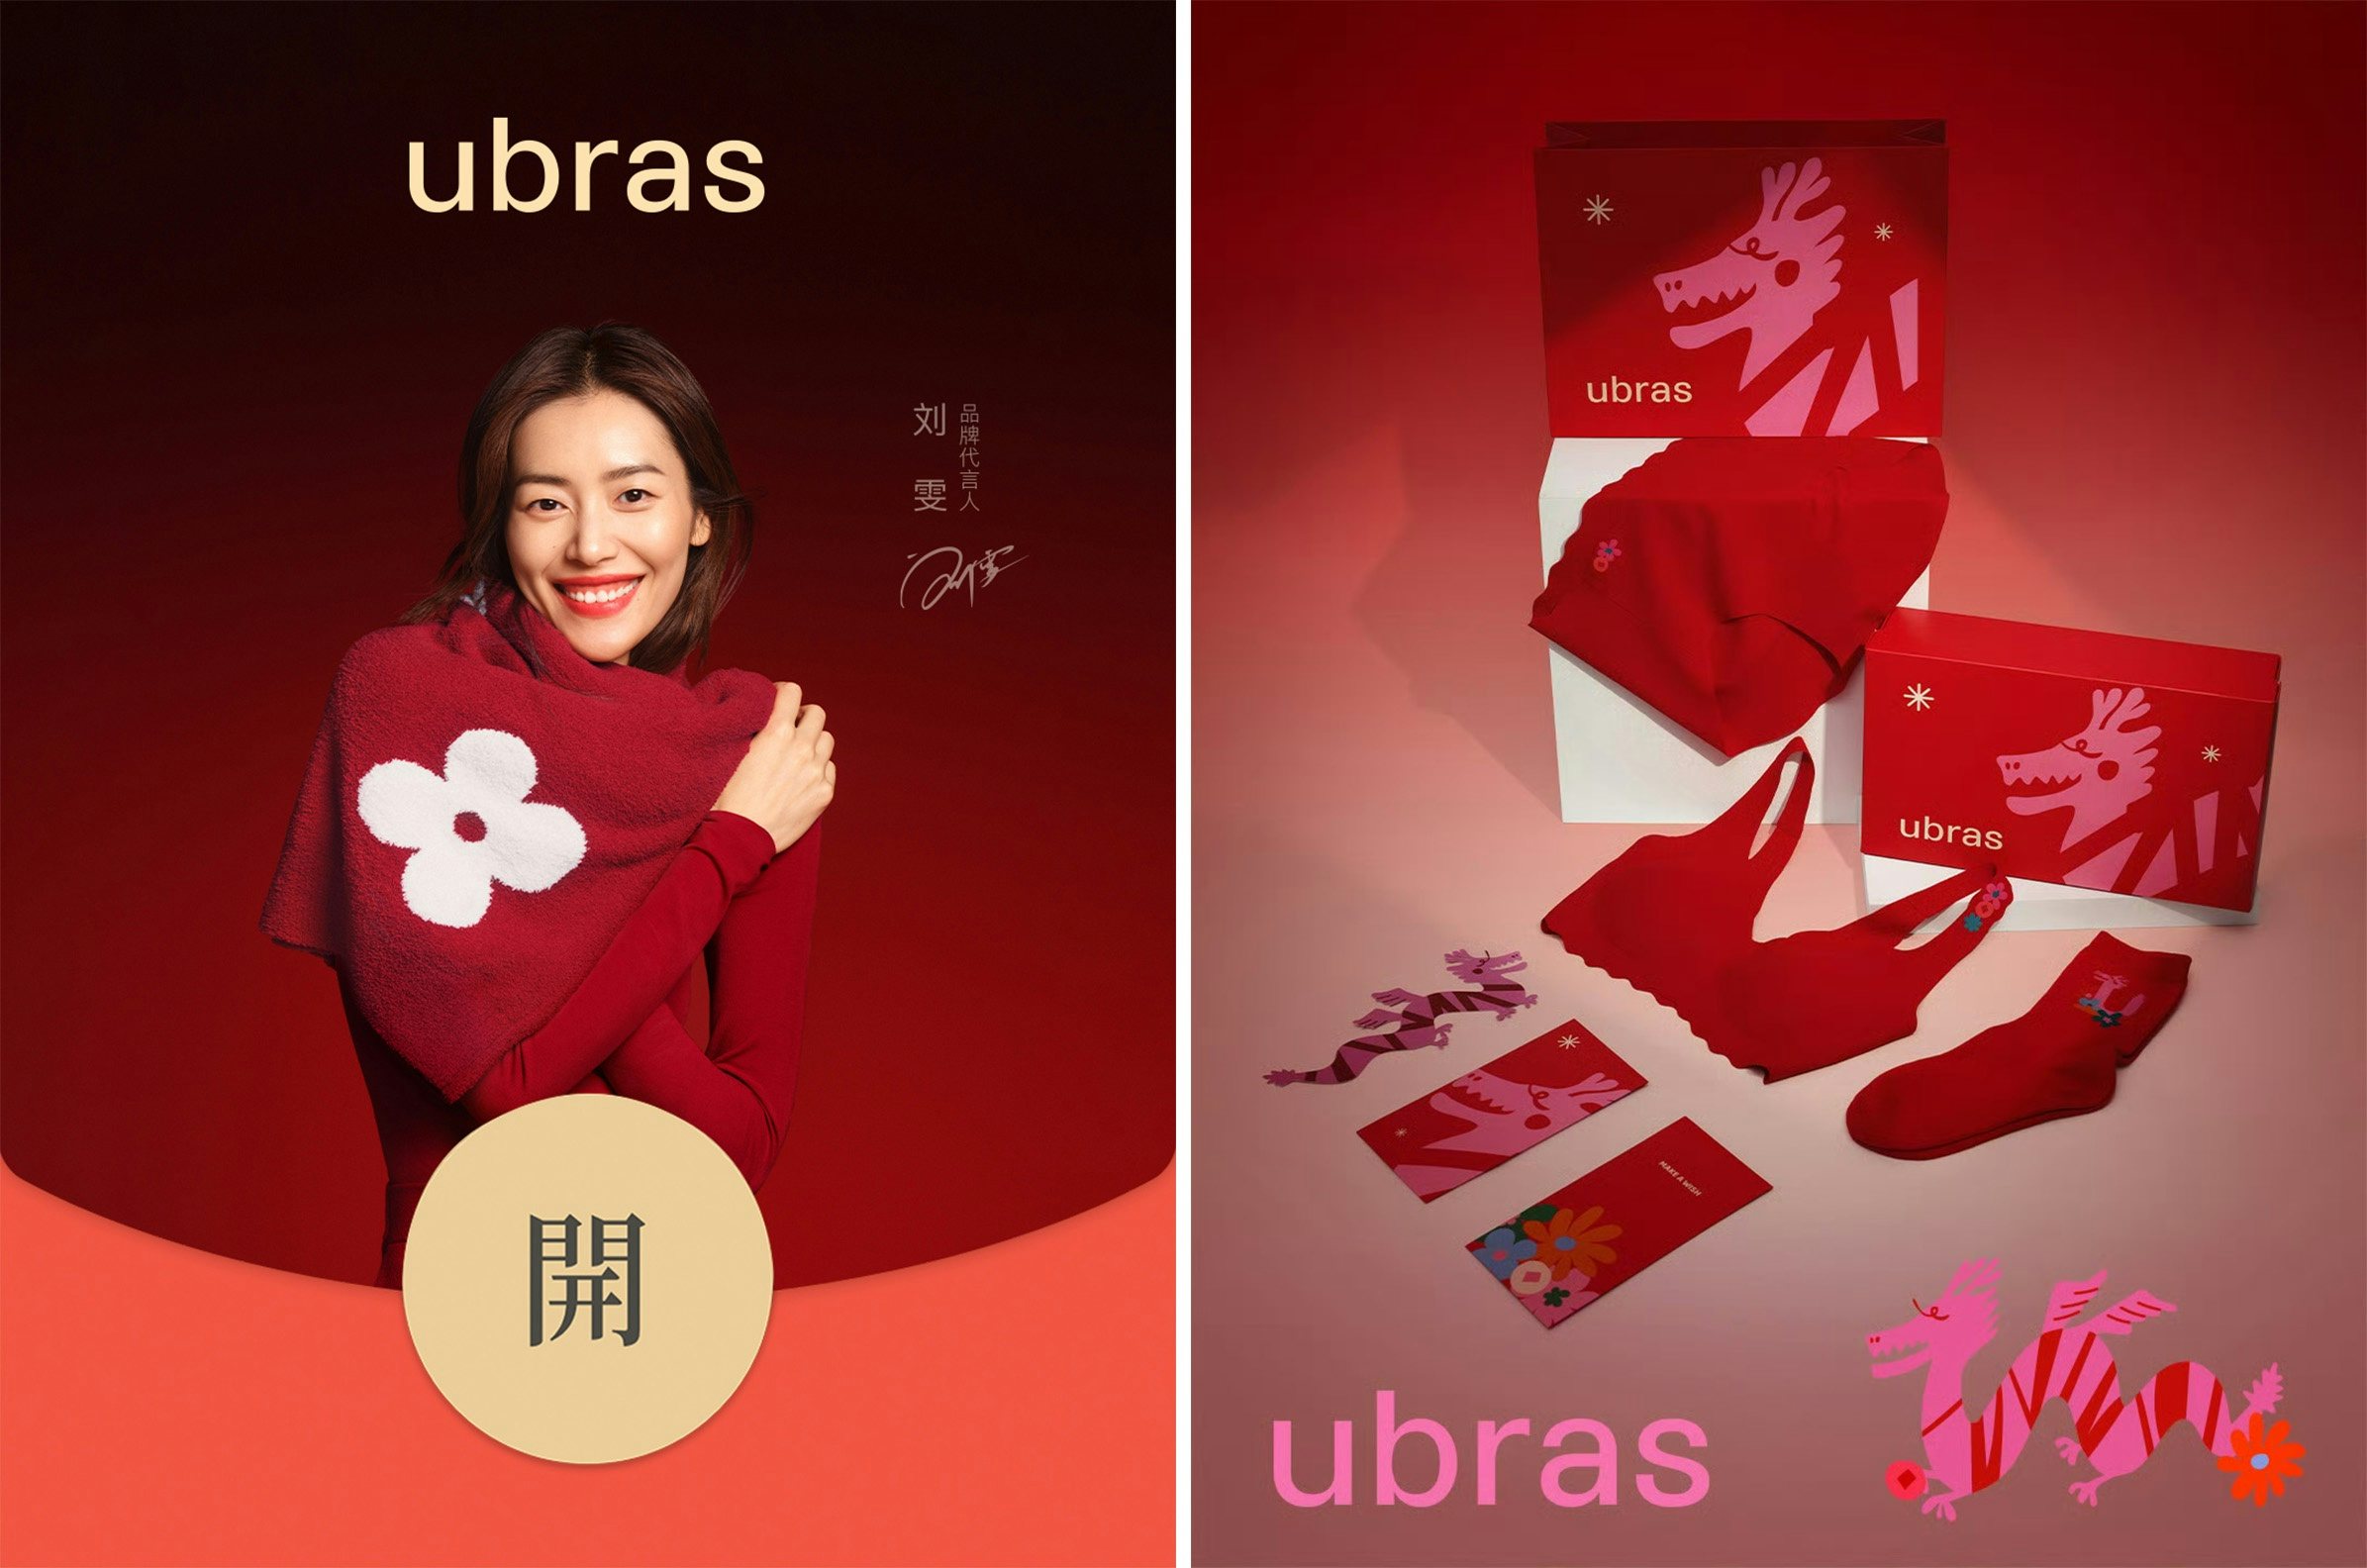 Fascon Customer Service - 🇹🇼Common Superstitions In Taiwan - Red underwear  brings good luck. Red is an important color in the Chinese culture and a  symbol of good fortune and joy. Many